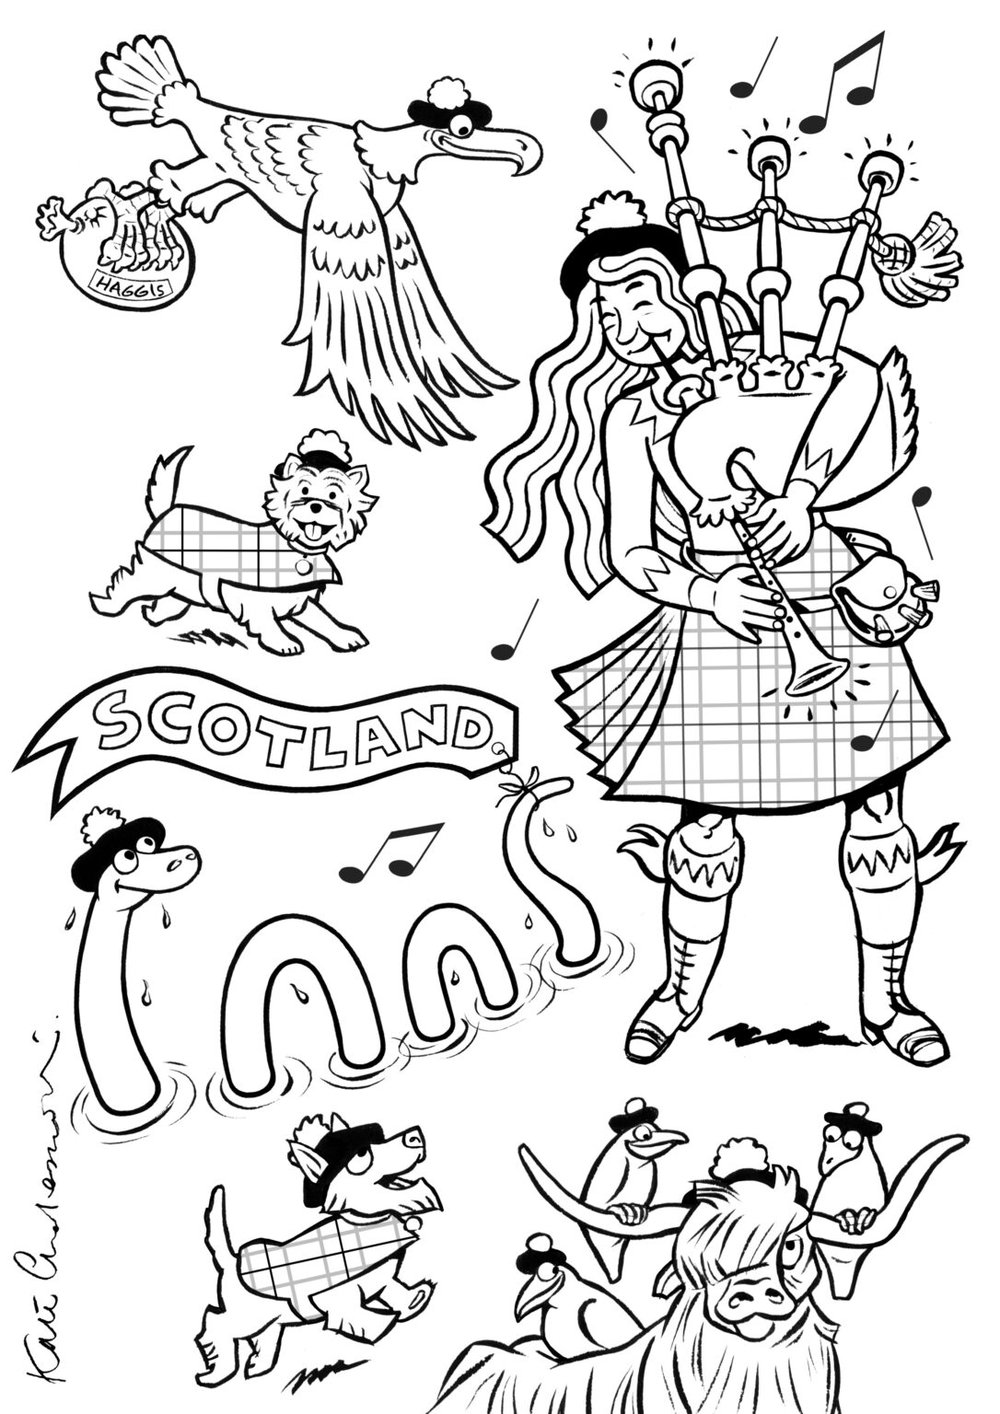 The Great British Colouring Book - Jam exclusive!